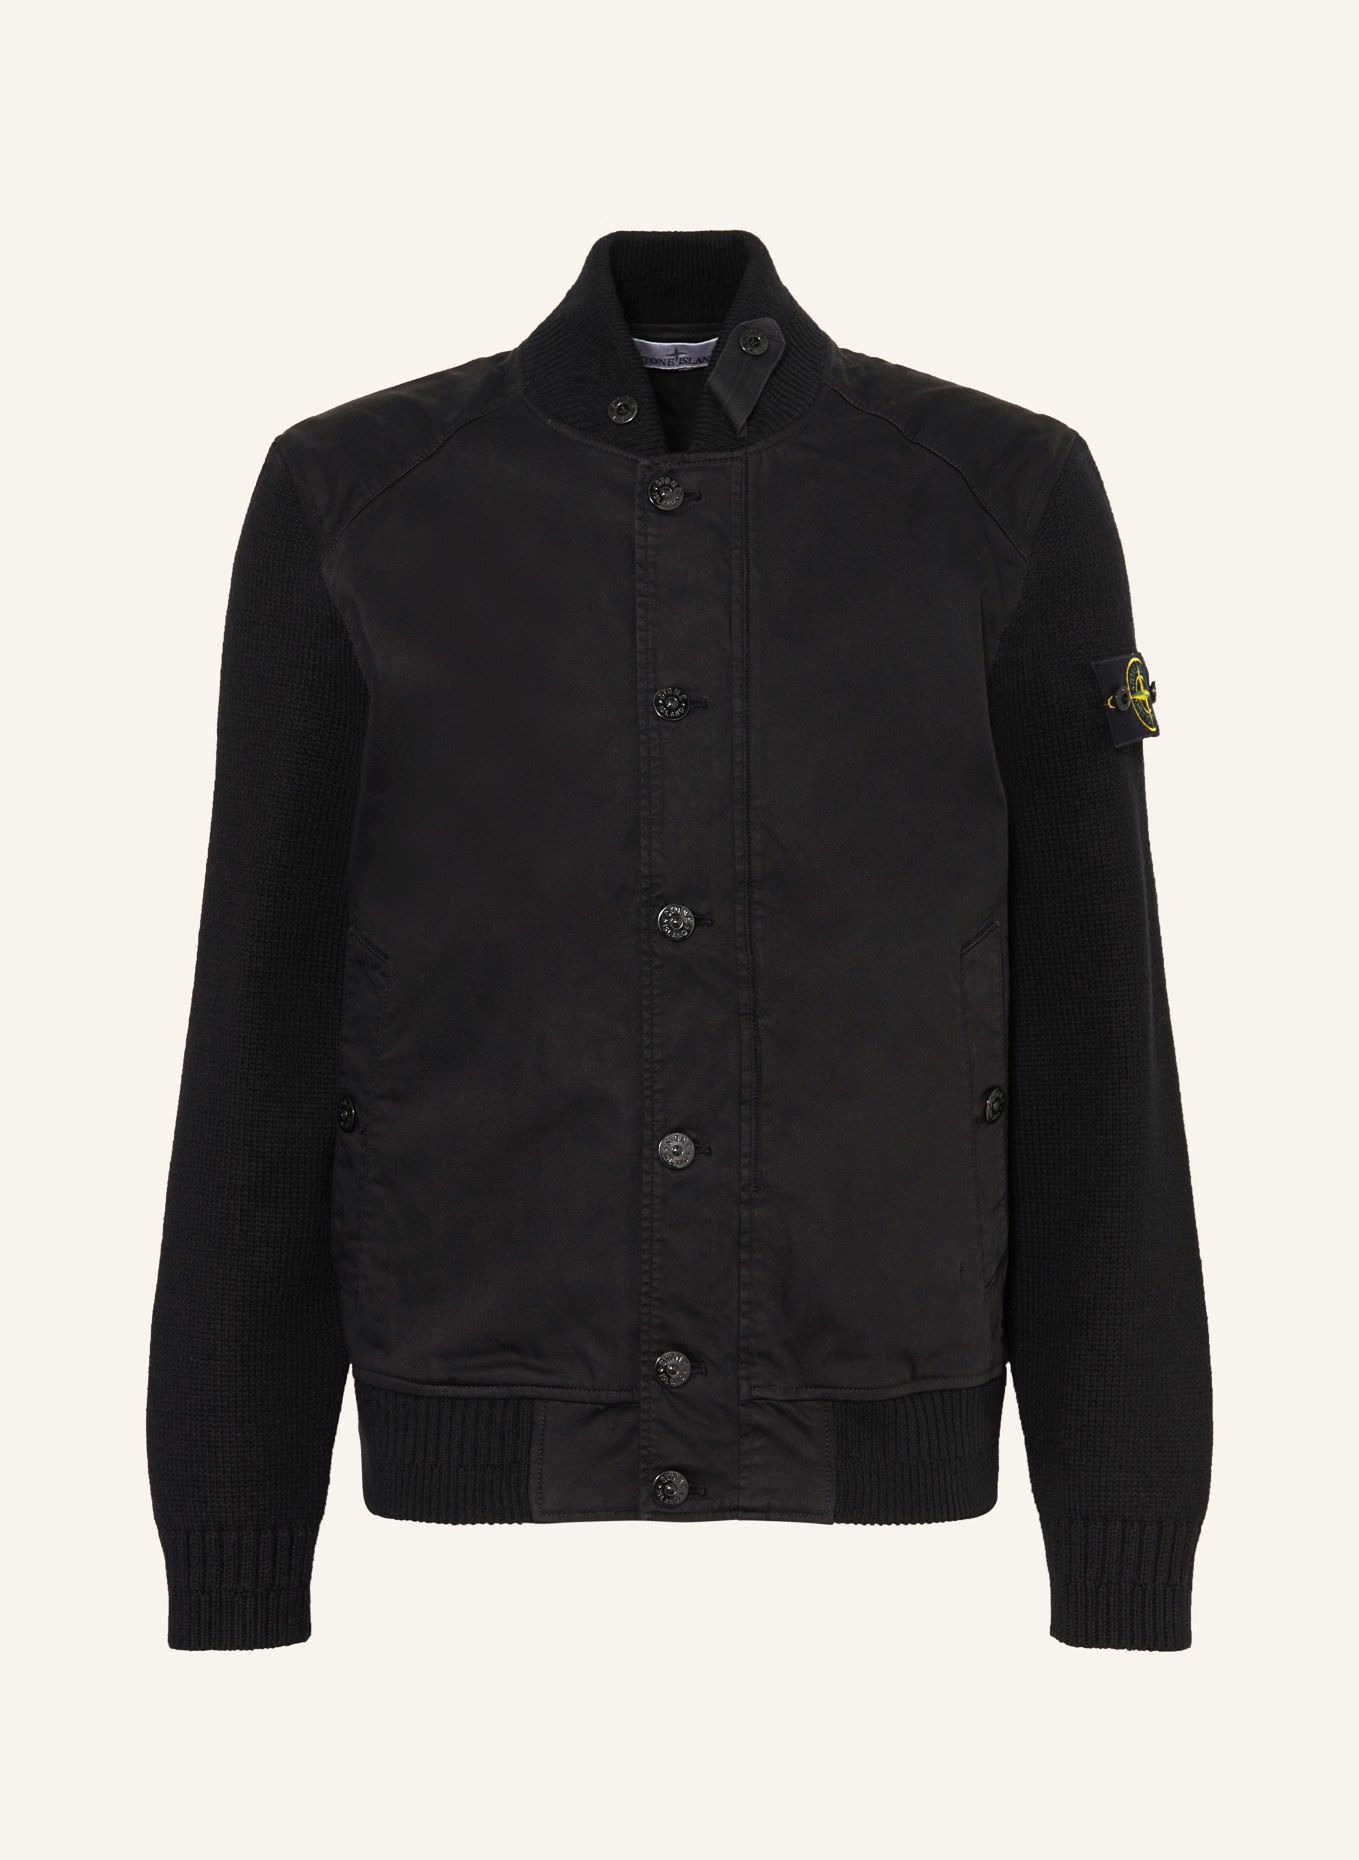 STONE ISLAND Bomber jacket in mixed materials, Color: BLACK (Image 1)